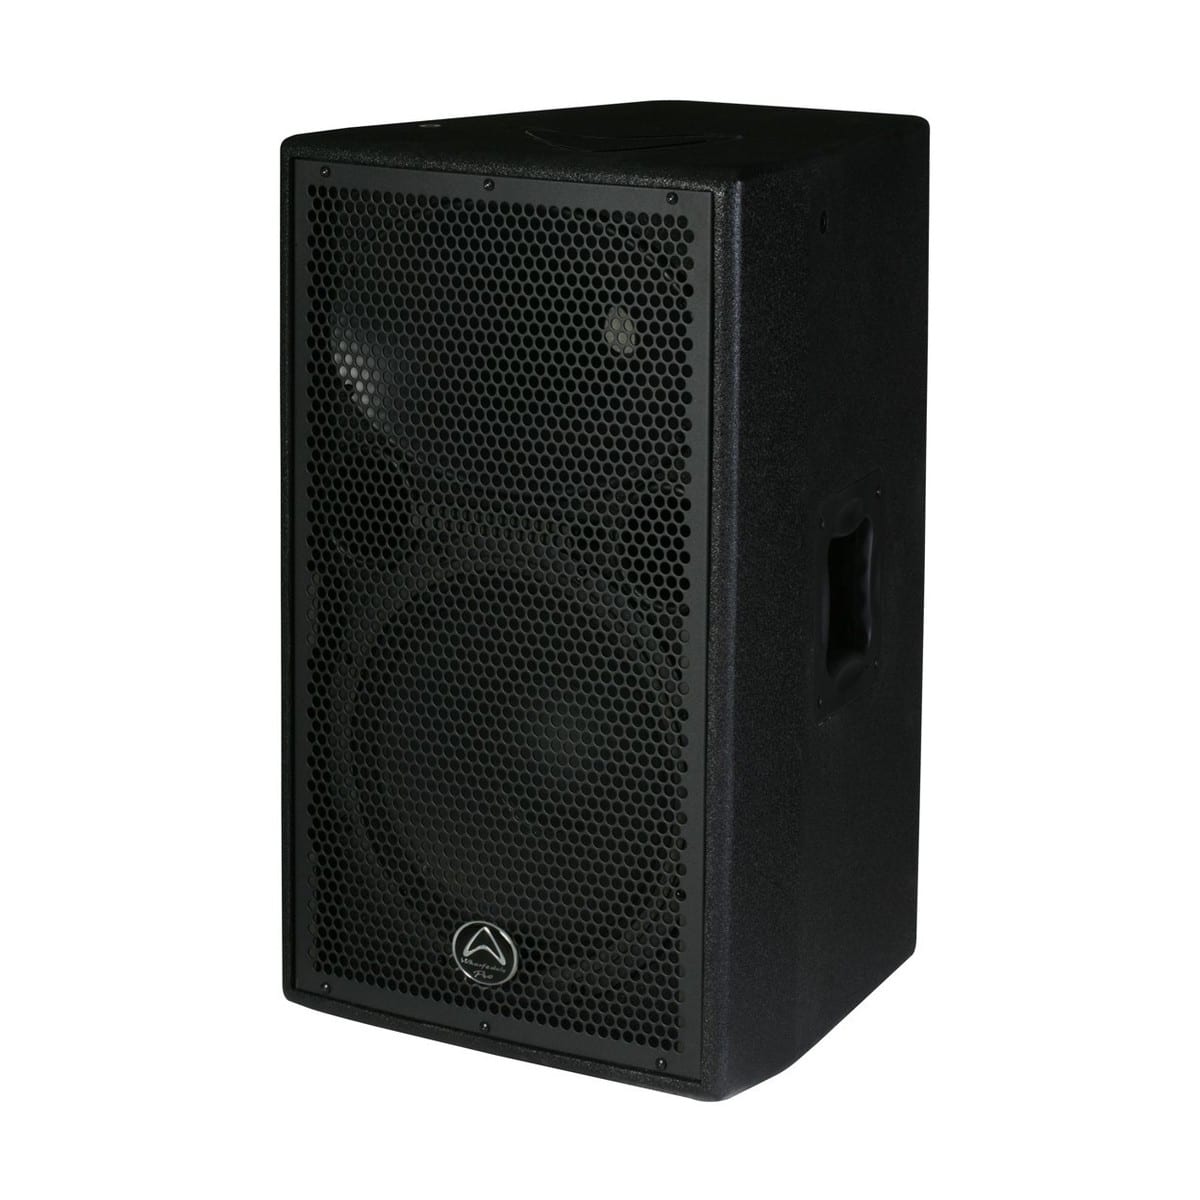 Wharfedale PRO Delta X12 at Bounce Online R5,995.00